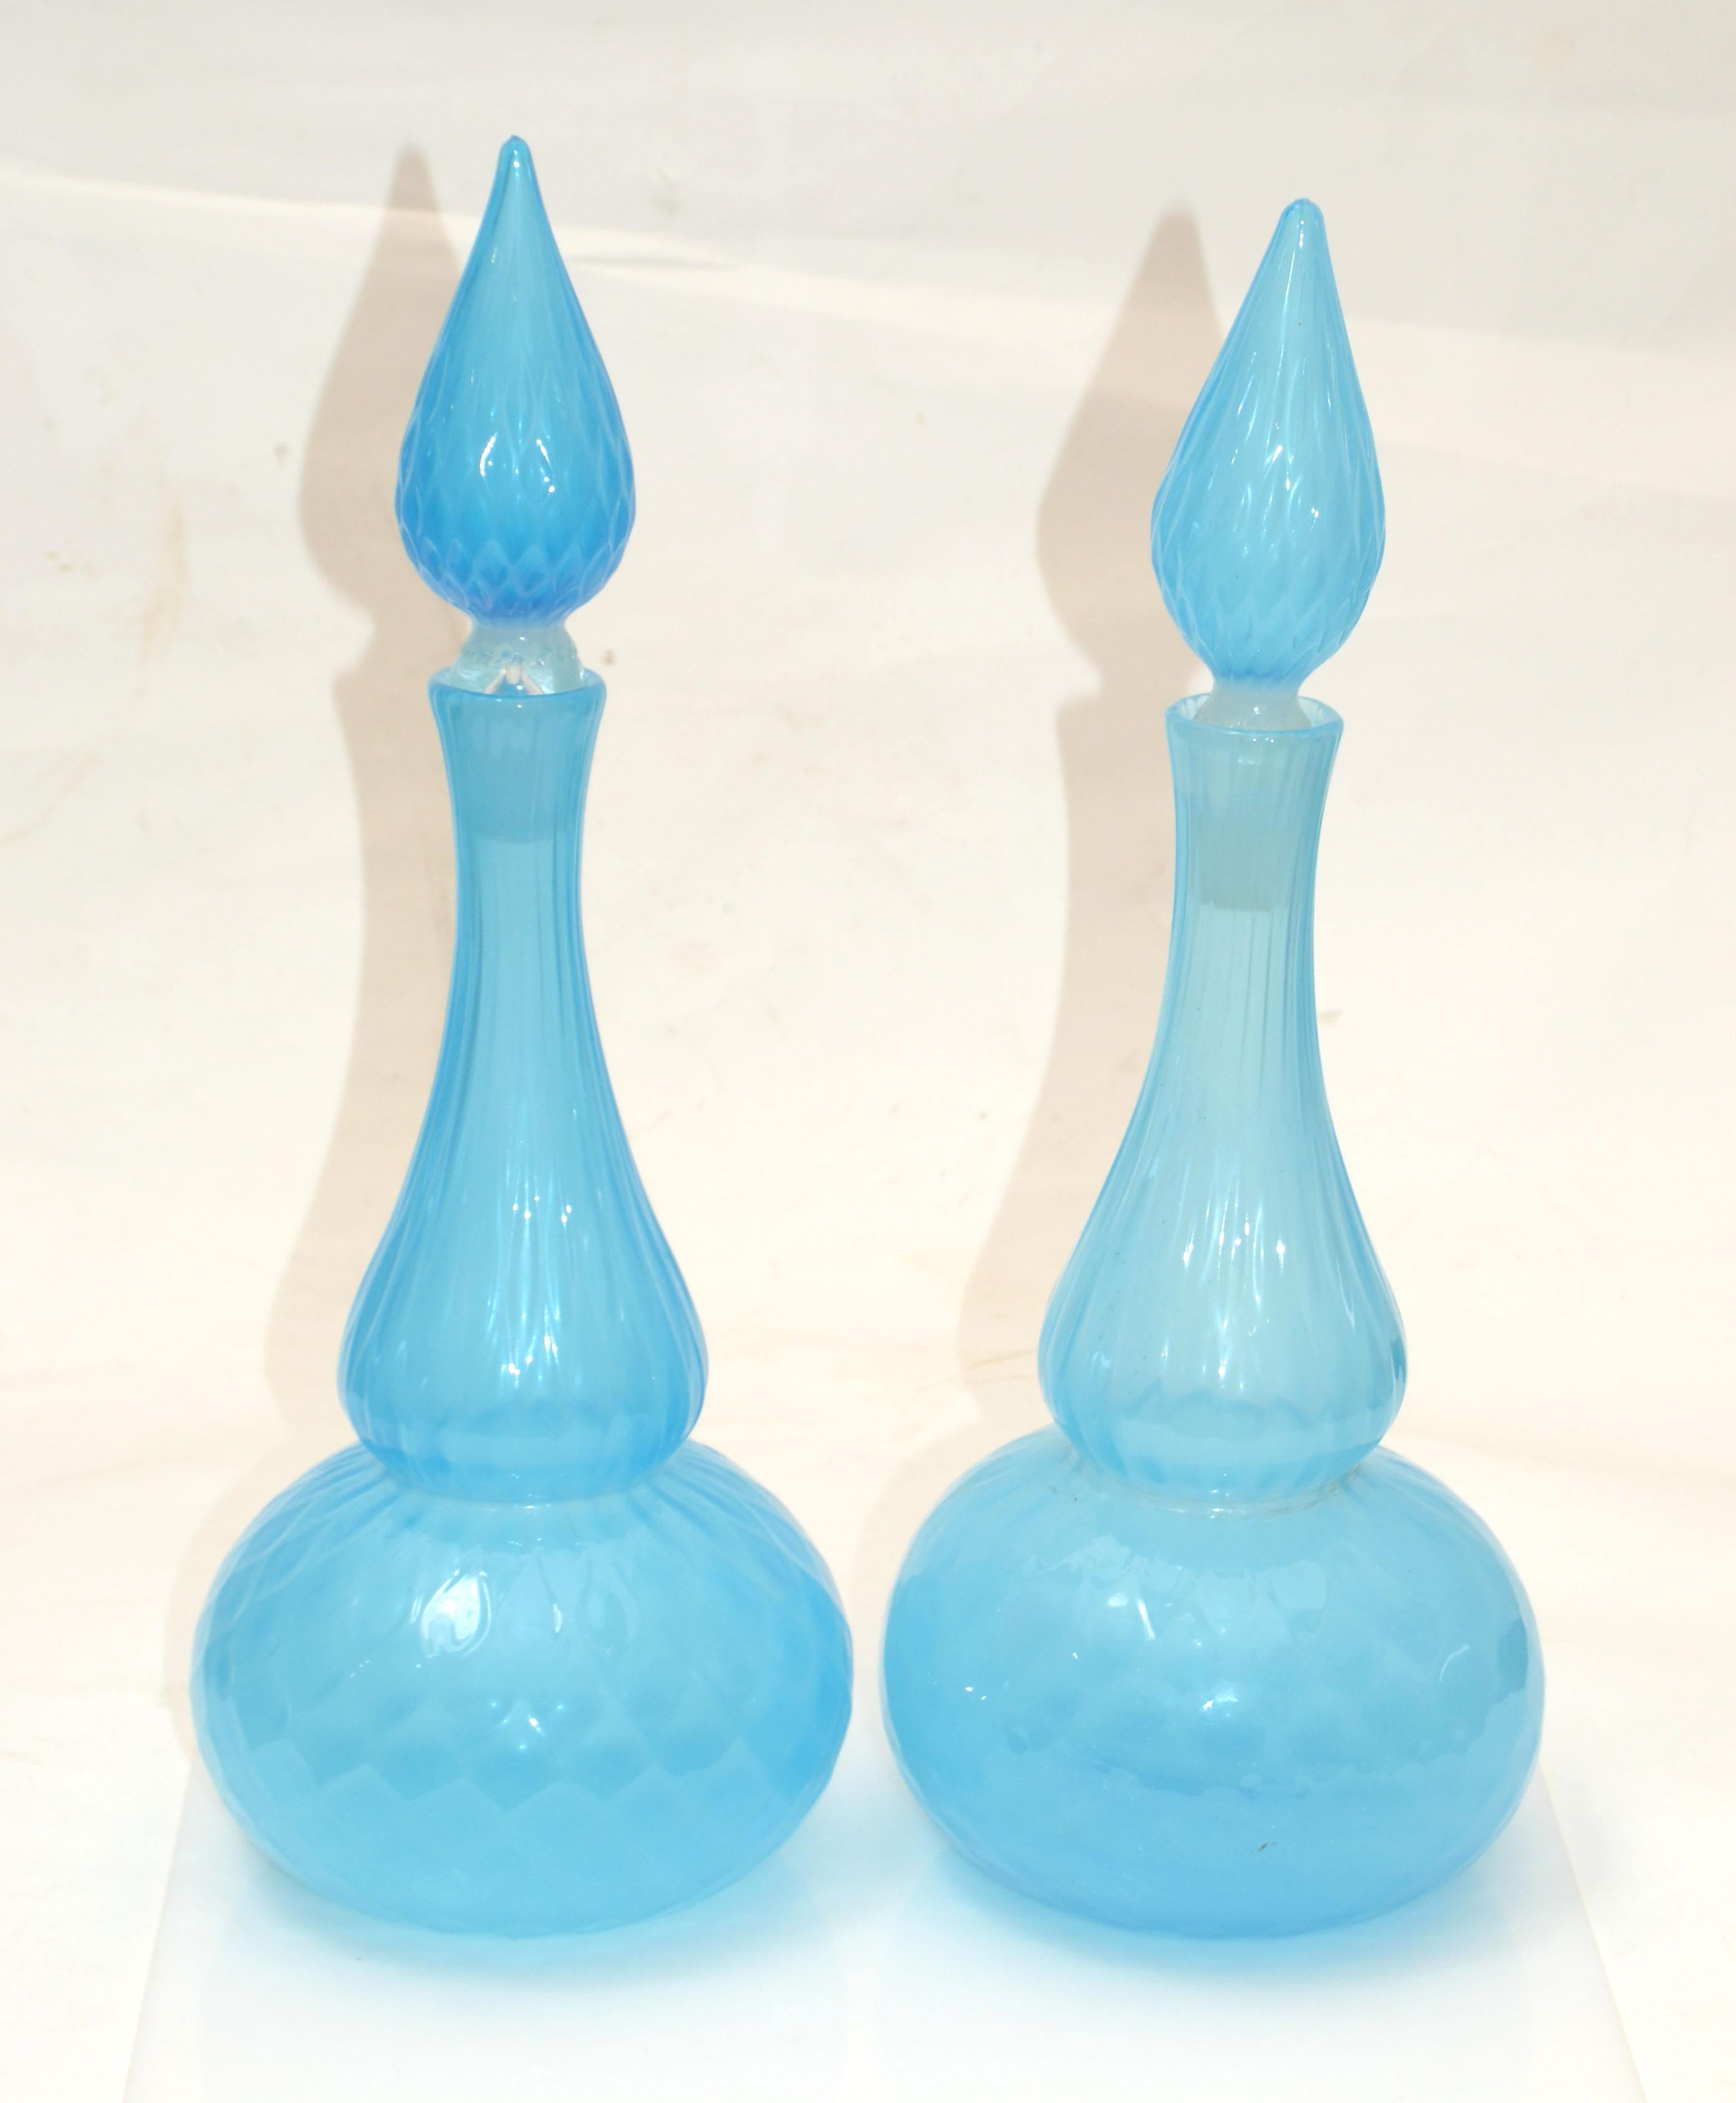 Stunning Pair of Mid-Century Modern Decanter or Vessel made out of blown faceted Murano Art Glass in light blue and stopper by Barbini, Italy.
A gorgeous addition for your holiday table settings.

 